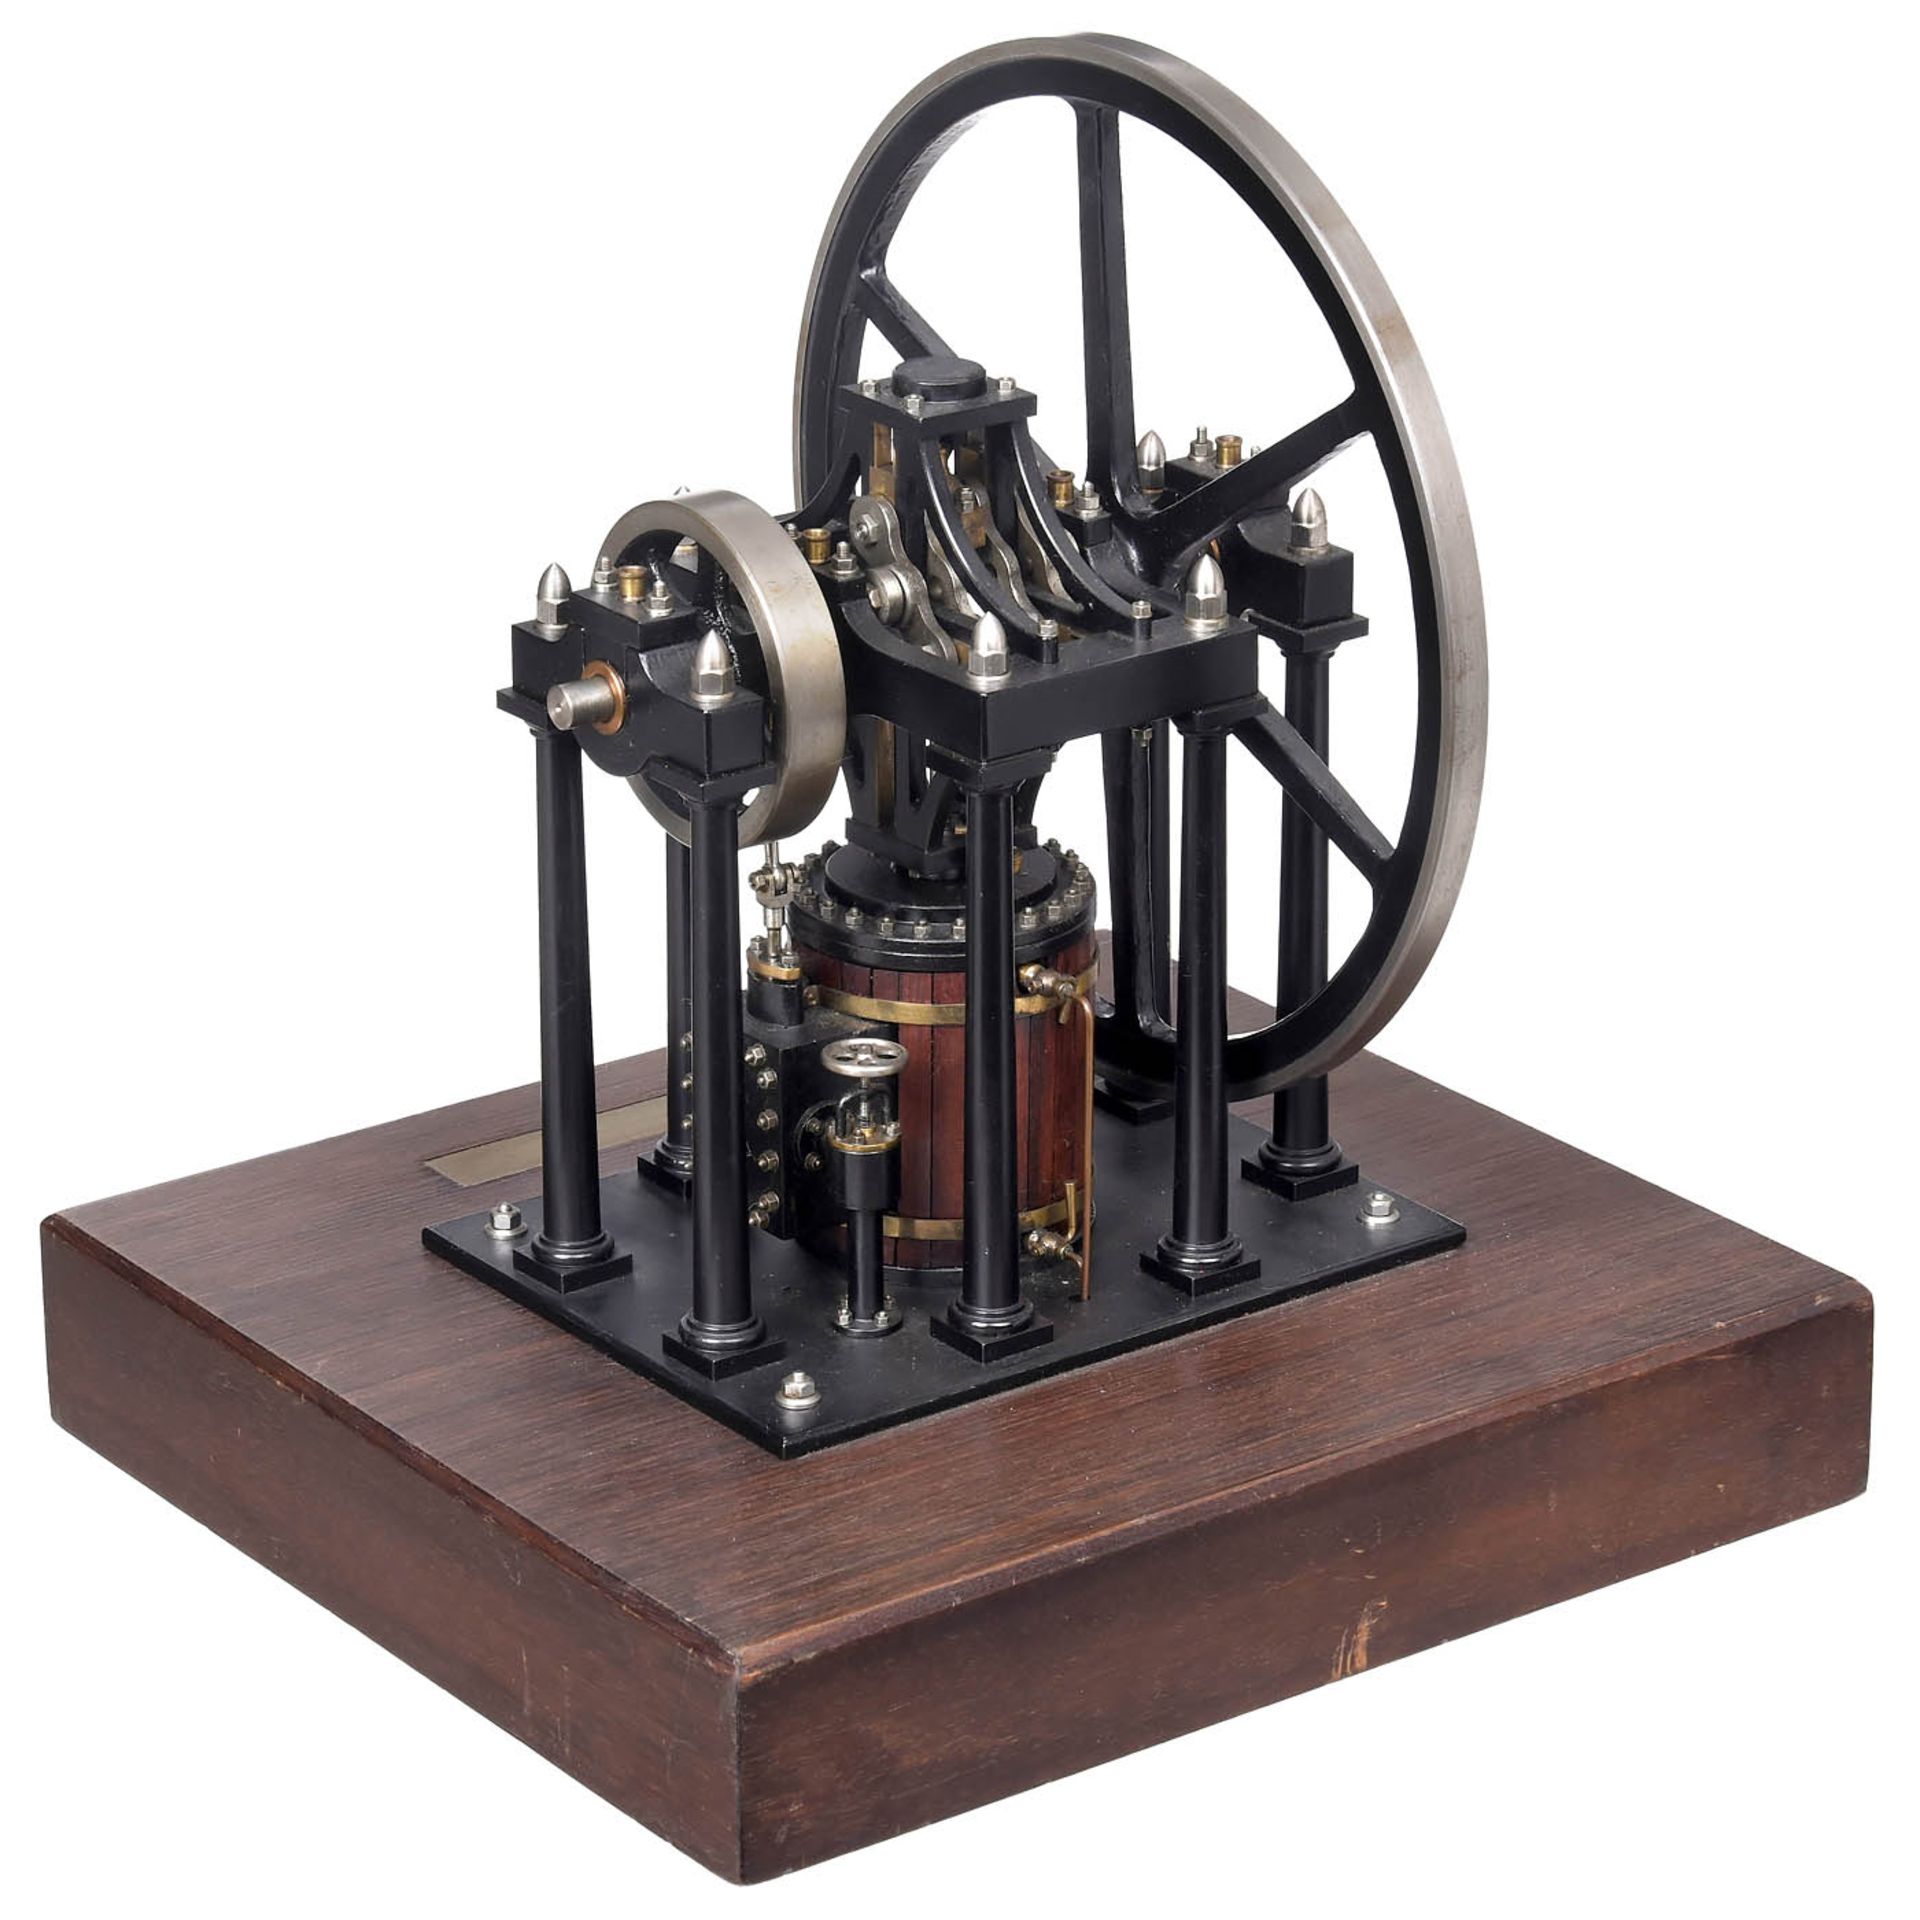 Model of the James Booth's Rectilinear Engine from 1843